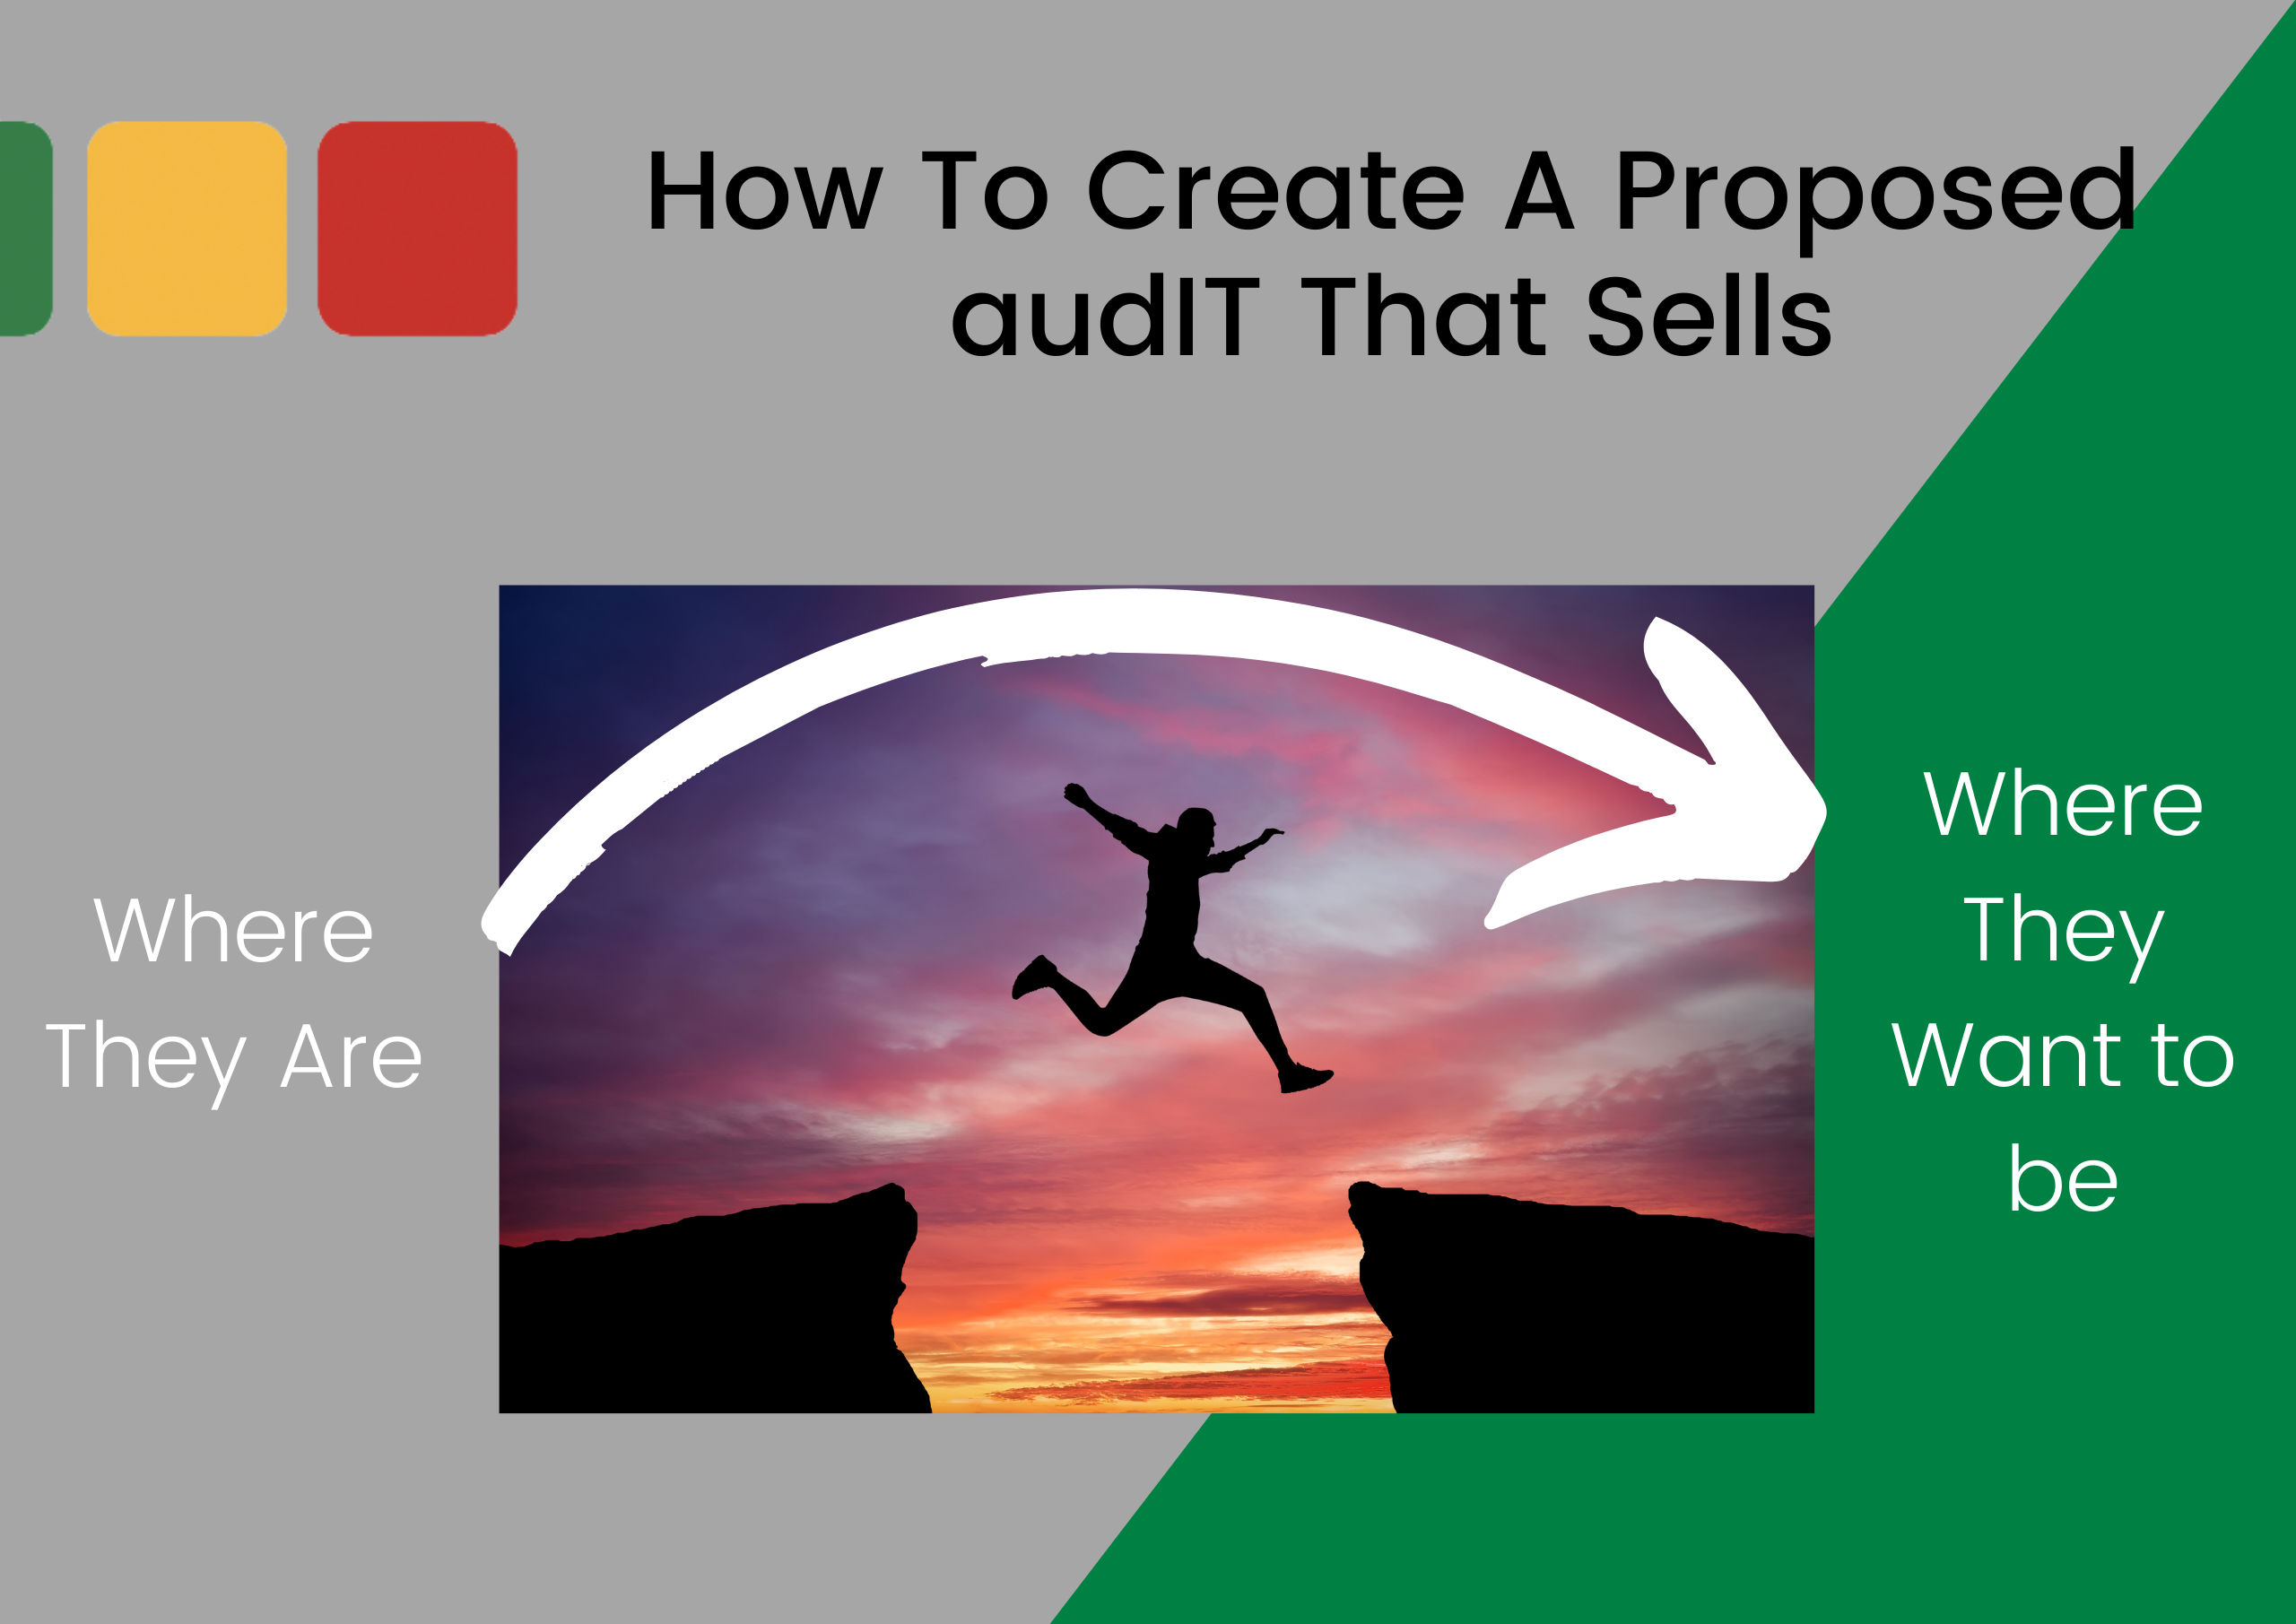 How-To-Create-A-Proposed-audIT-That-Sells-2560x1811-1